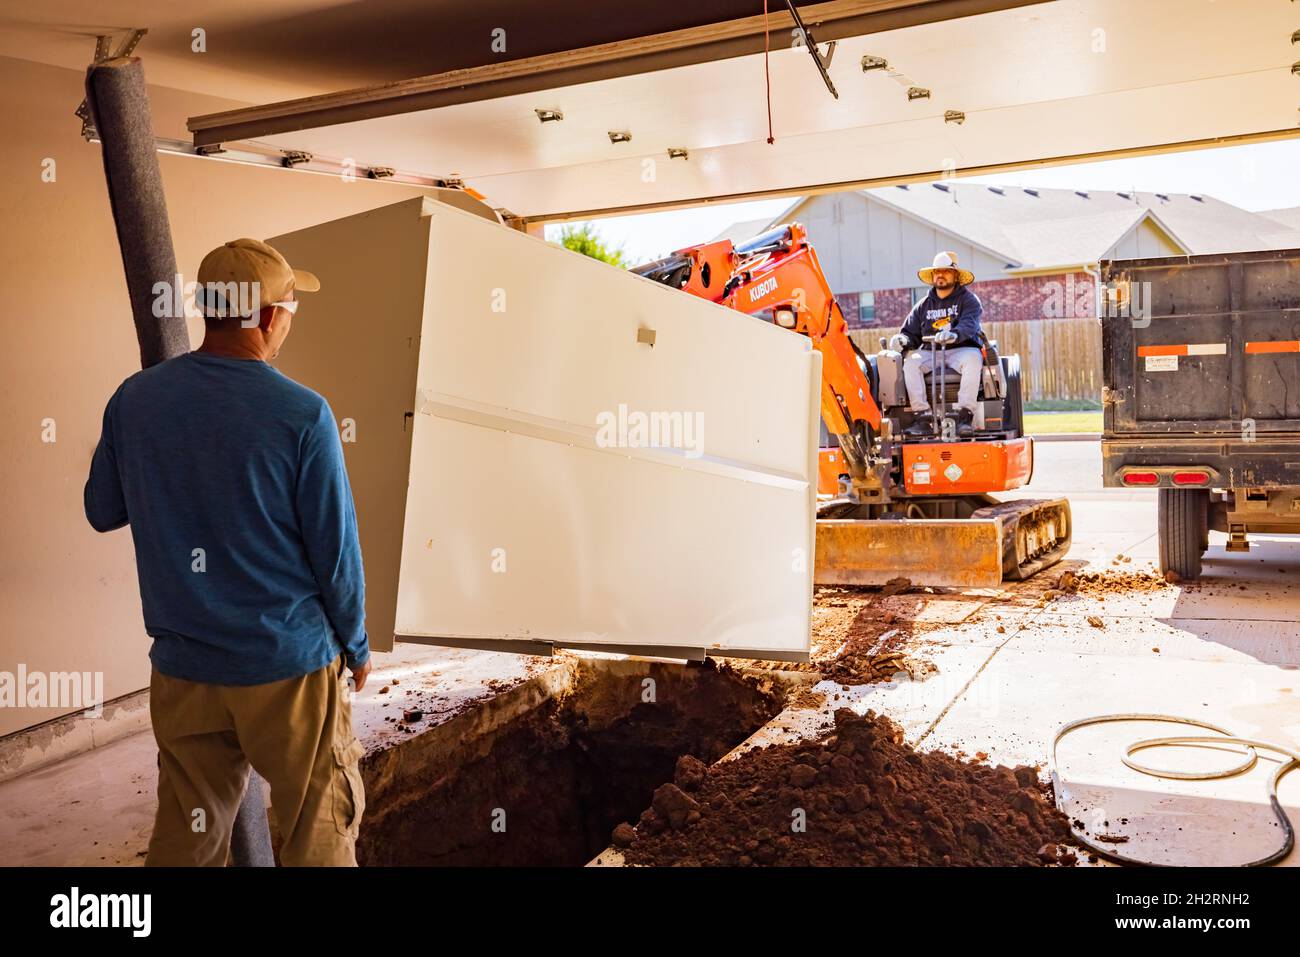 https://c8.alamy.com/comp/2H2RNH2/oklahoma-oct-19-2021-worker-was-working-on-a-garage-underground-storm-shelter-installation-2H2RNH2.jpg